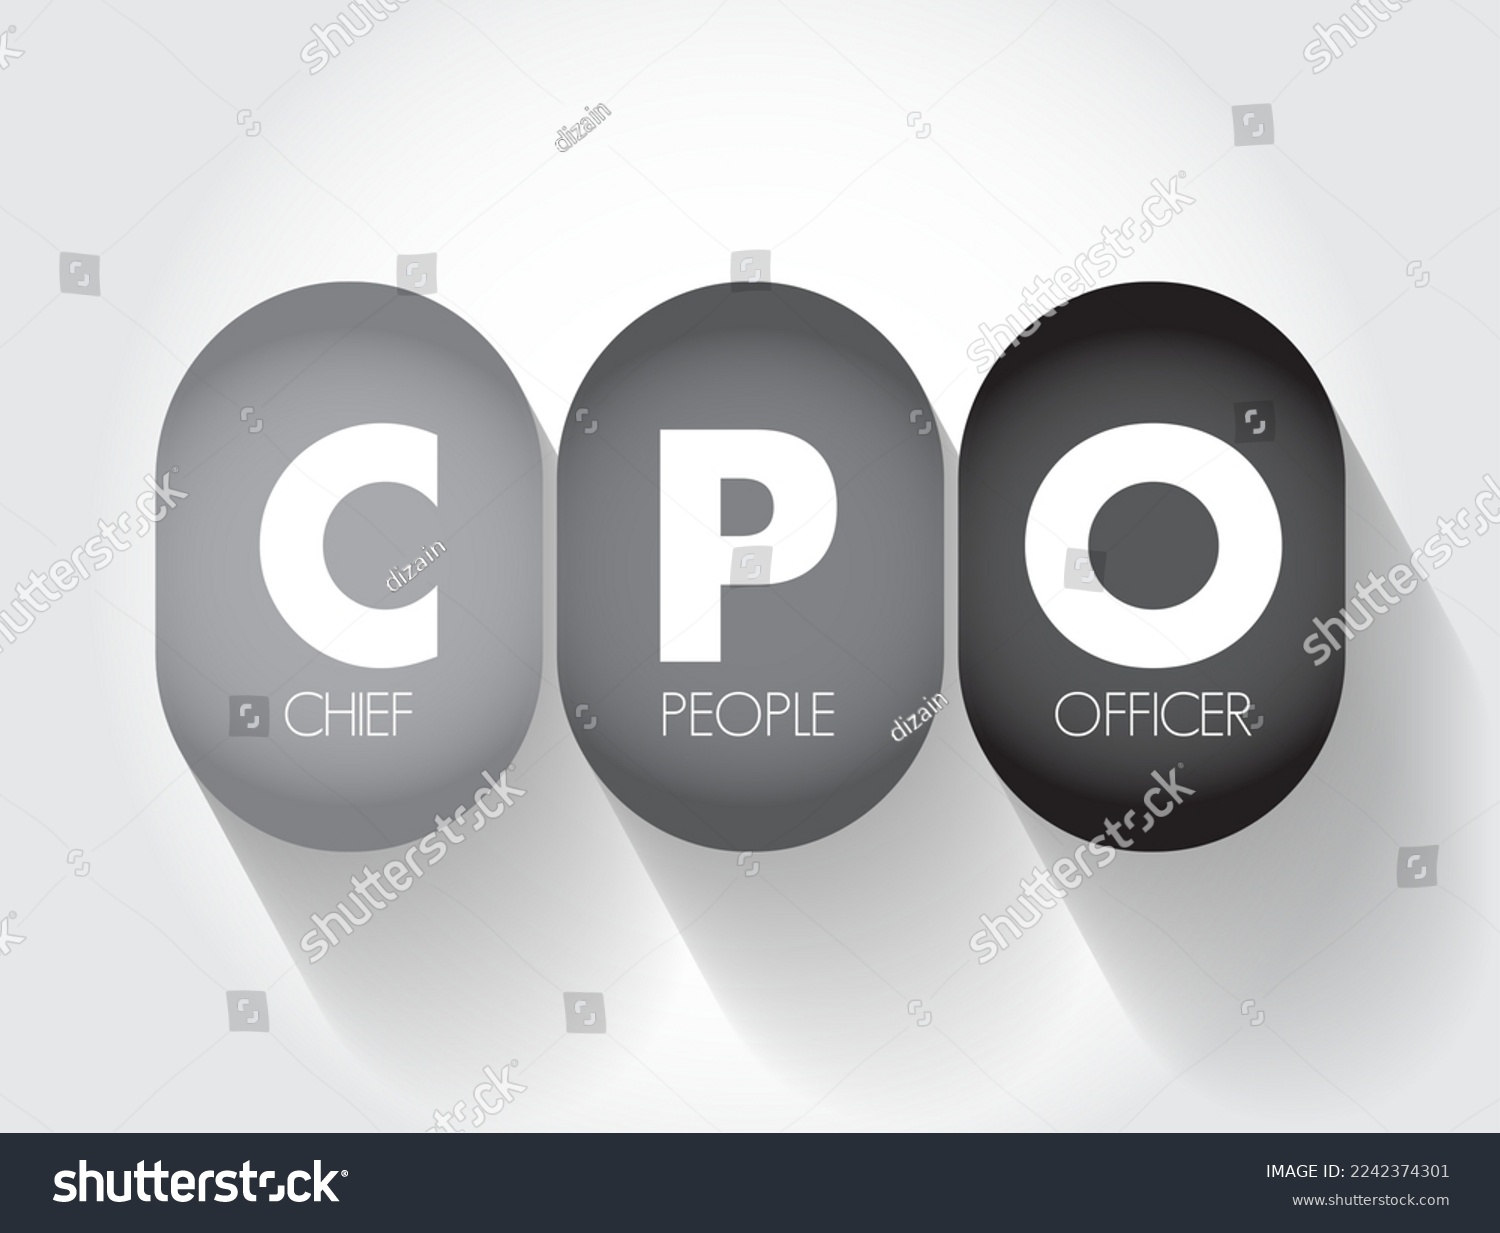 CPO Chief People Officer - corporate officer who oversees all aspects of human resource management and industrial relations policies, acronym text concept background #2242374301